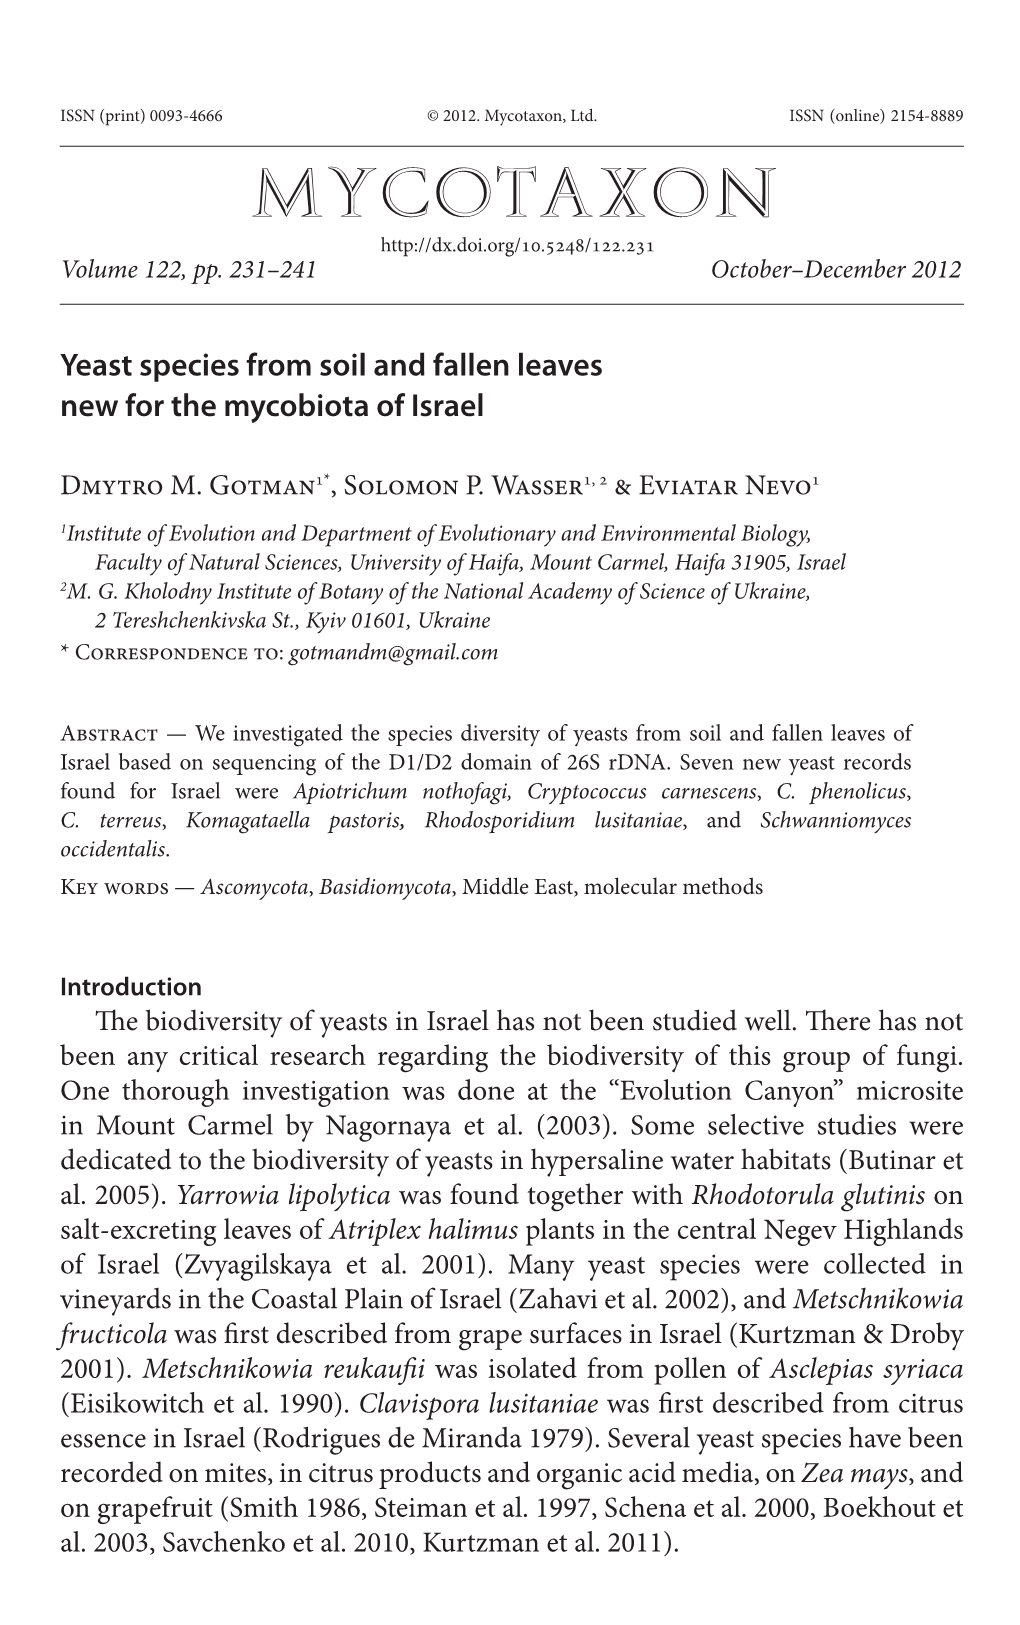 Yeast Species from Soil and Fallen Leaves New for the Mycobiota of Israel